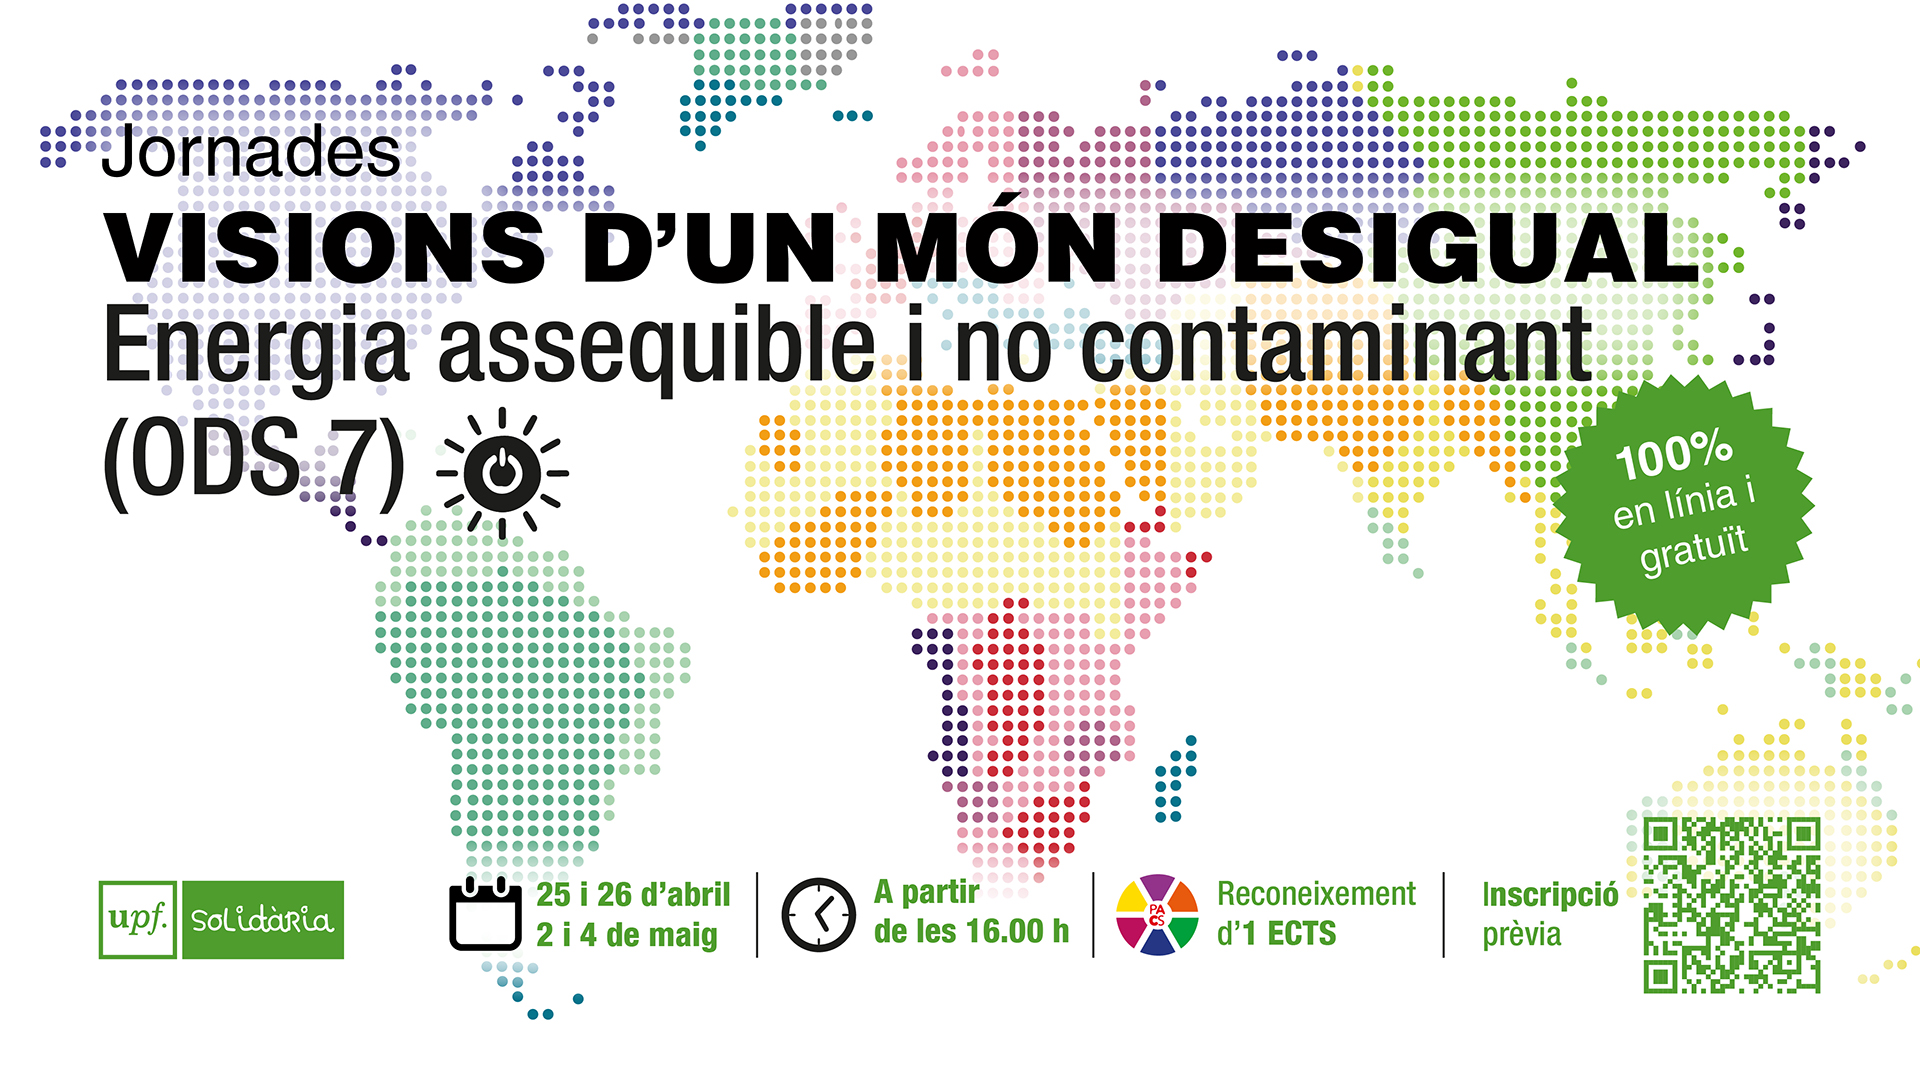 The 7th edition of the Visions d'un Món Desigual conference comes to a close